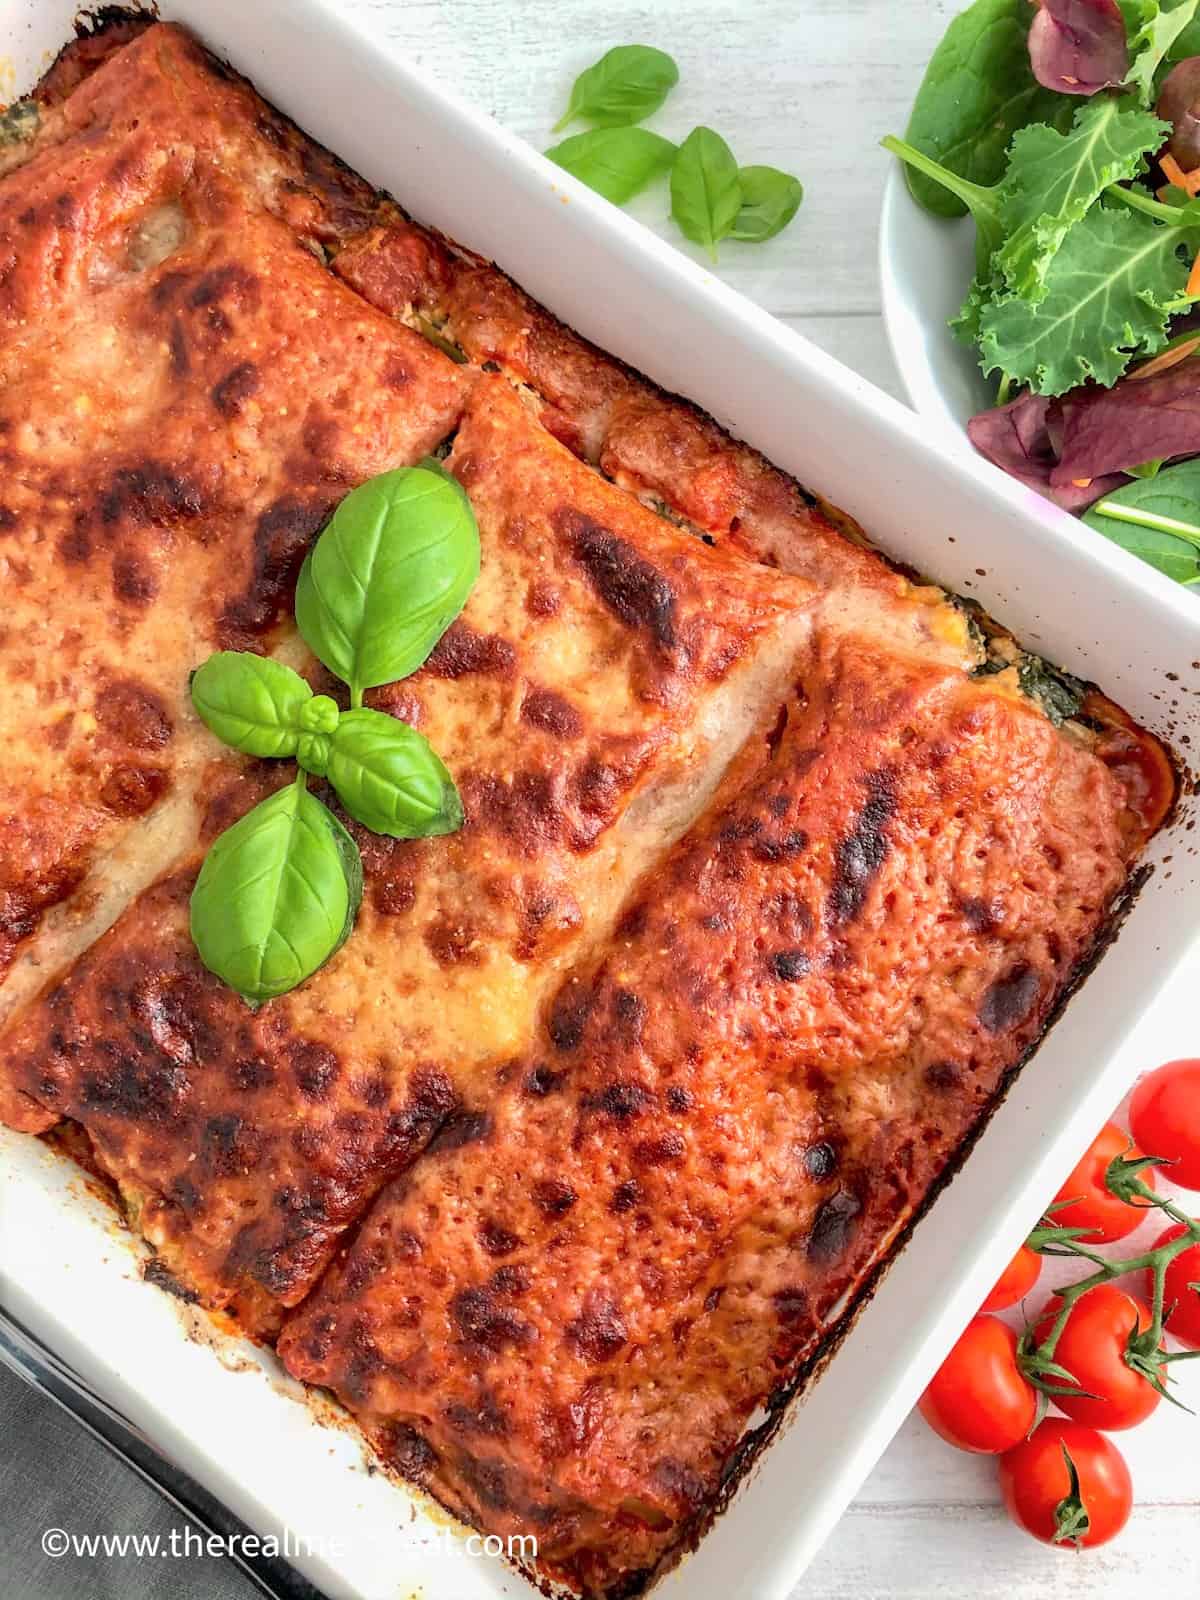 Spinach and Ricotta Lasagne baked in dish with cherry tomatoes and side salad